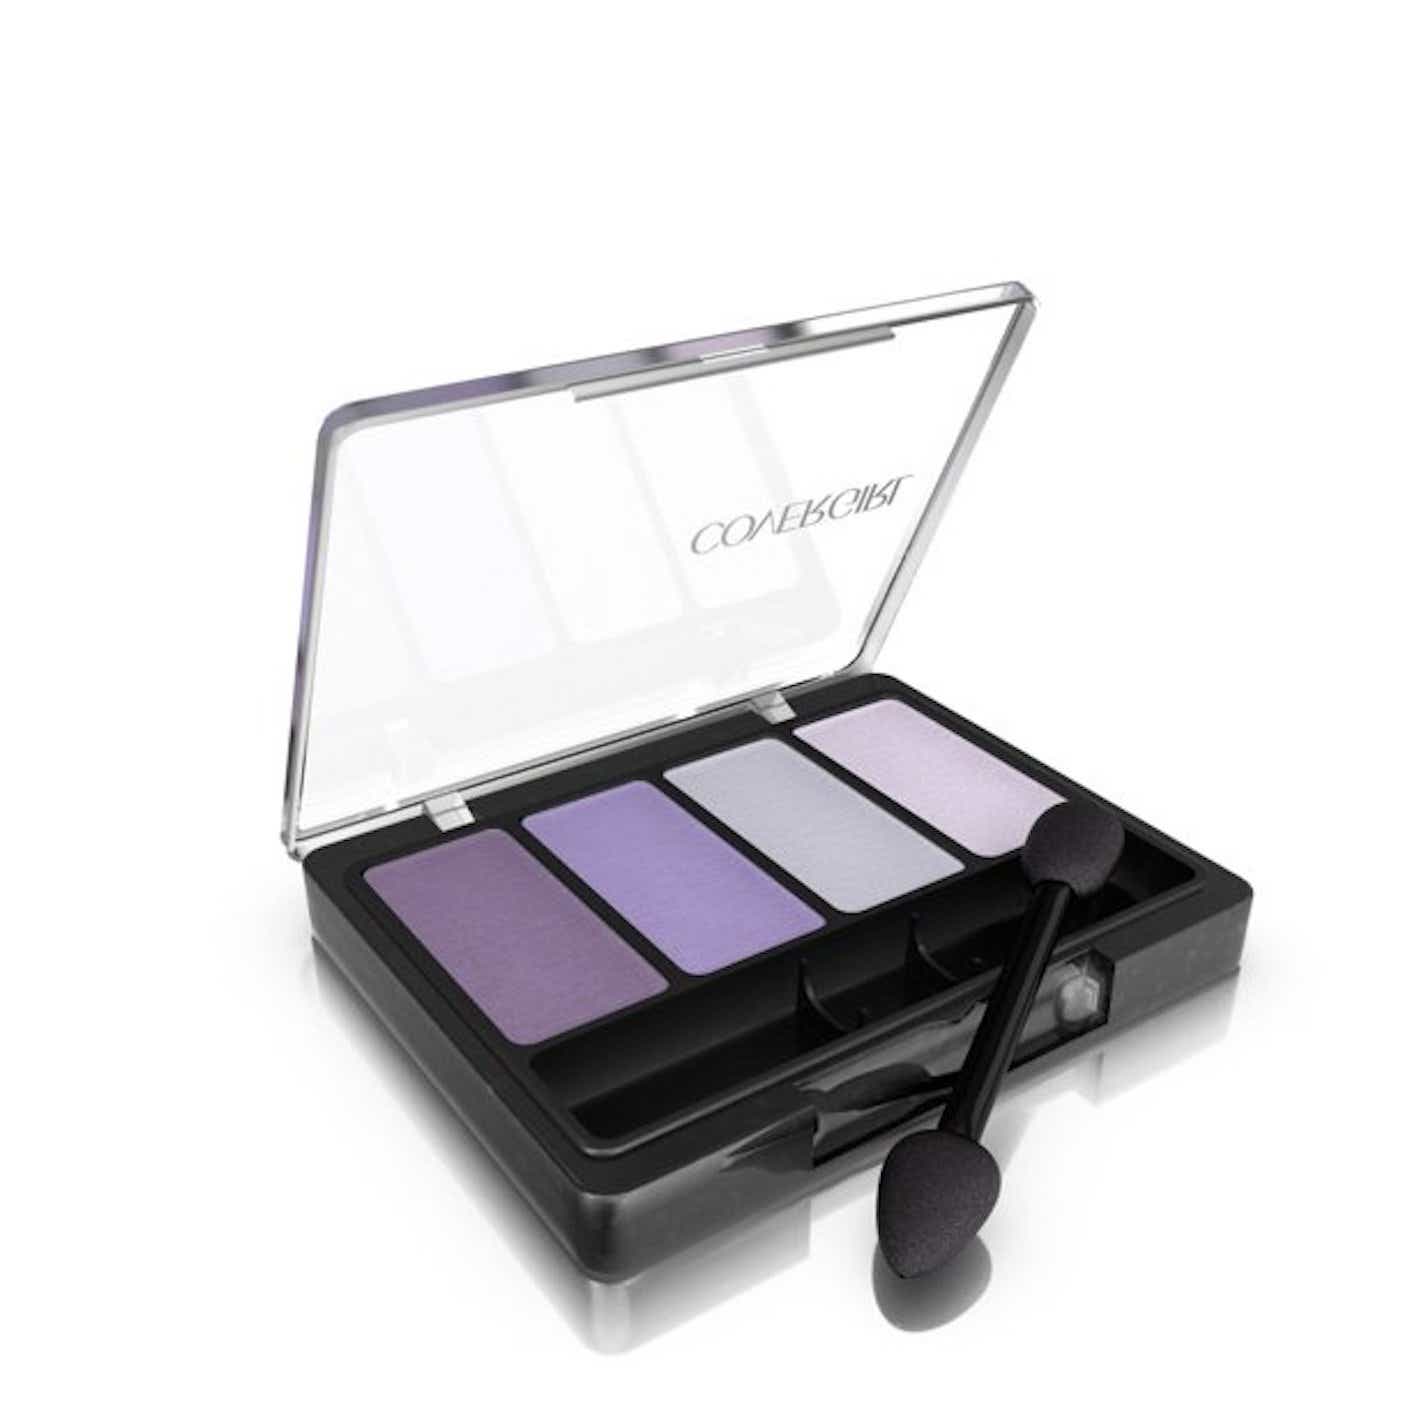 An eyeshadow palette is open to show that it holds four shades of cool purple.